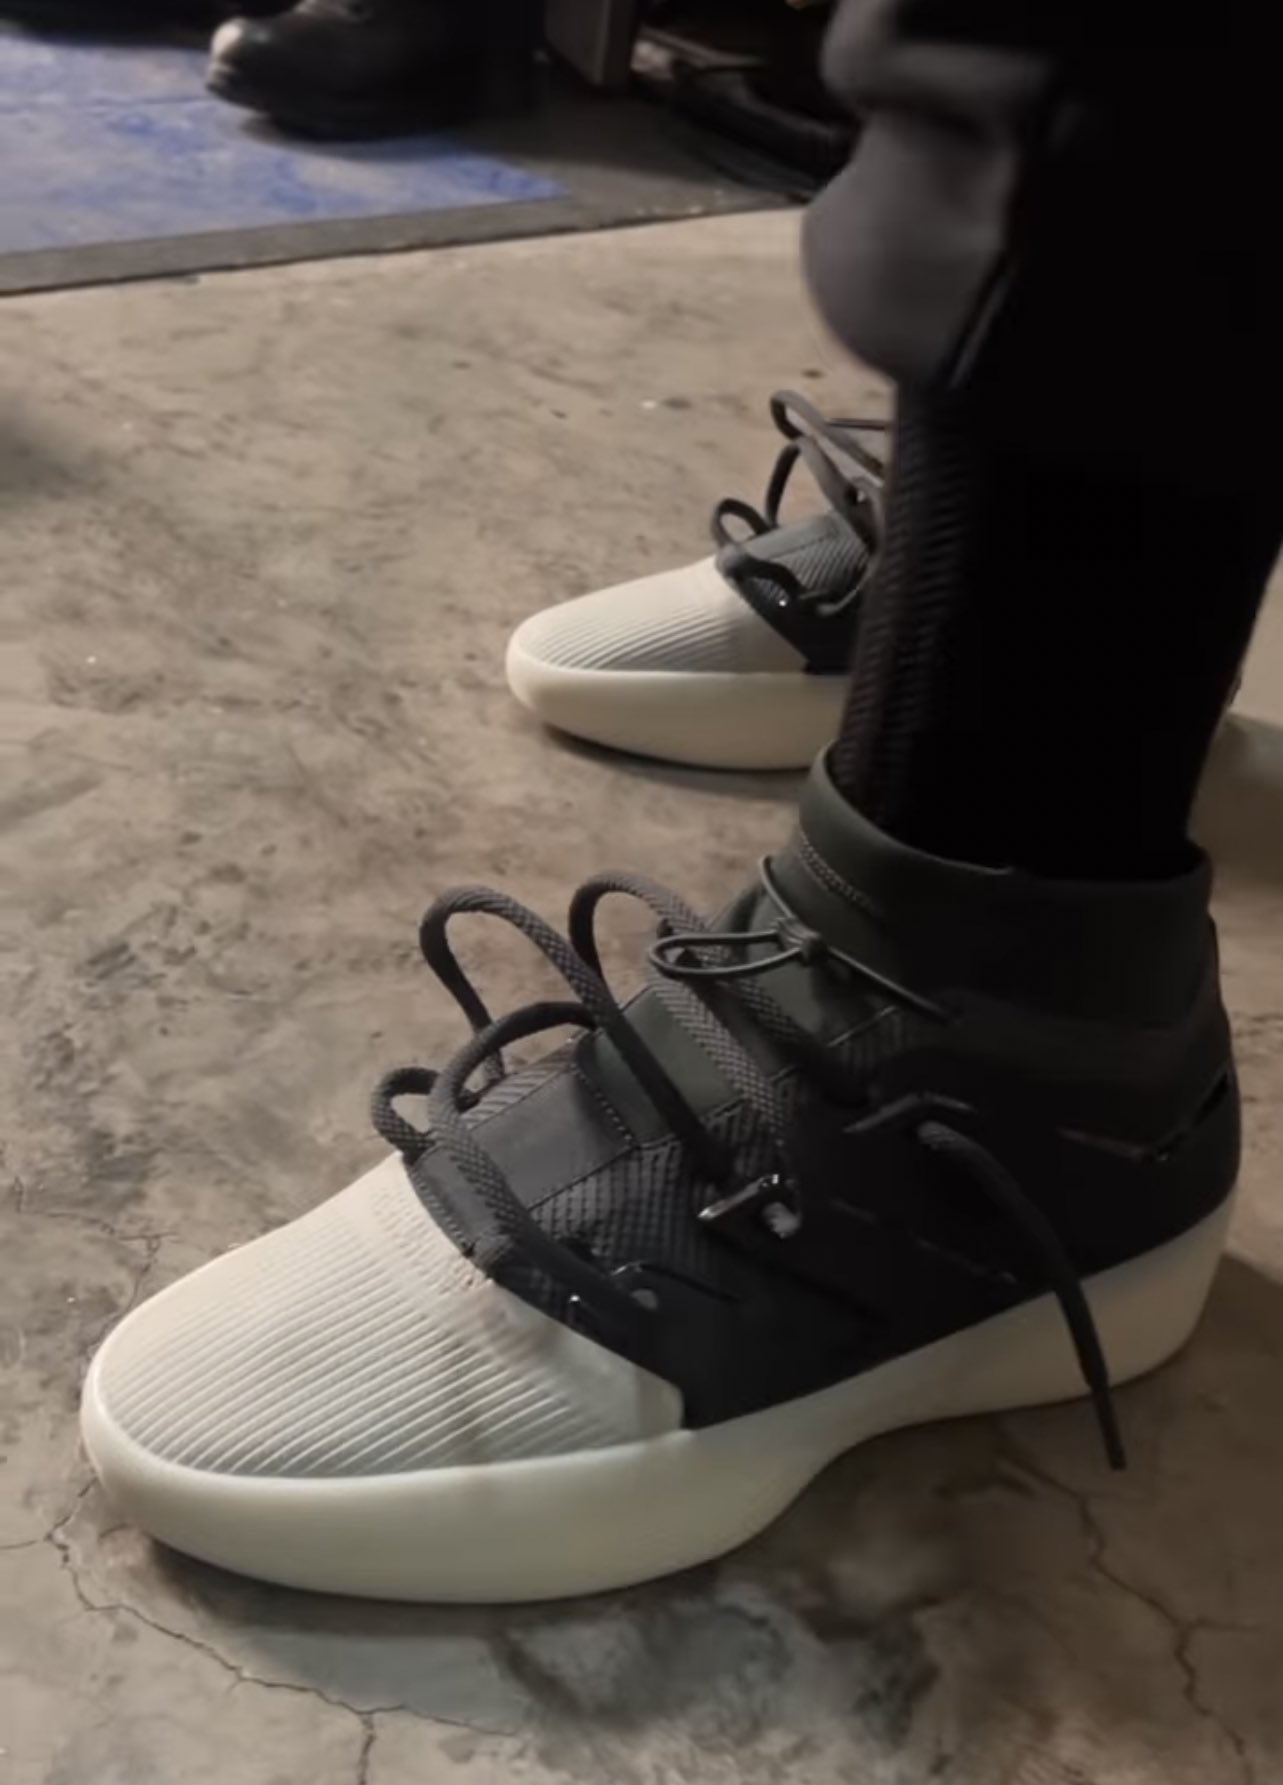 sporadisk tsunamien Modstand sockjig on X: "The FOG x adidas sneakers look pretty good. Also look like  they'd be hard to put on like Nike FOG 1s were https://t.co/4pP0ldZevh" / X